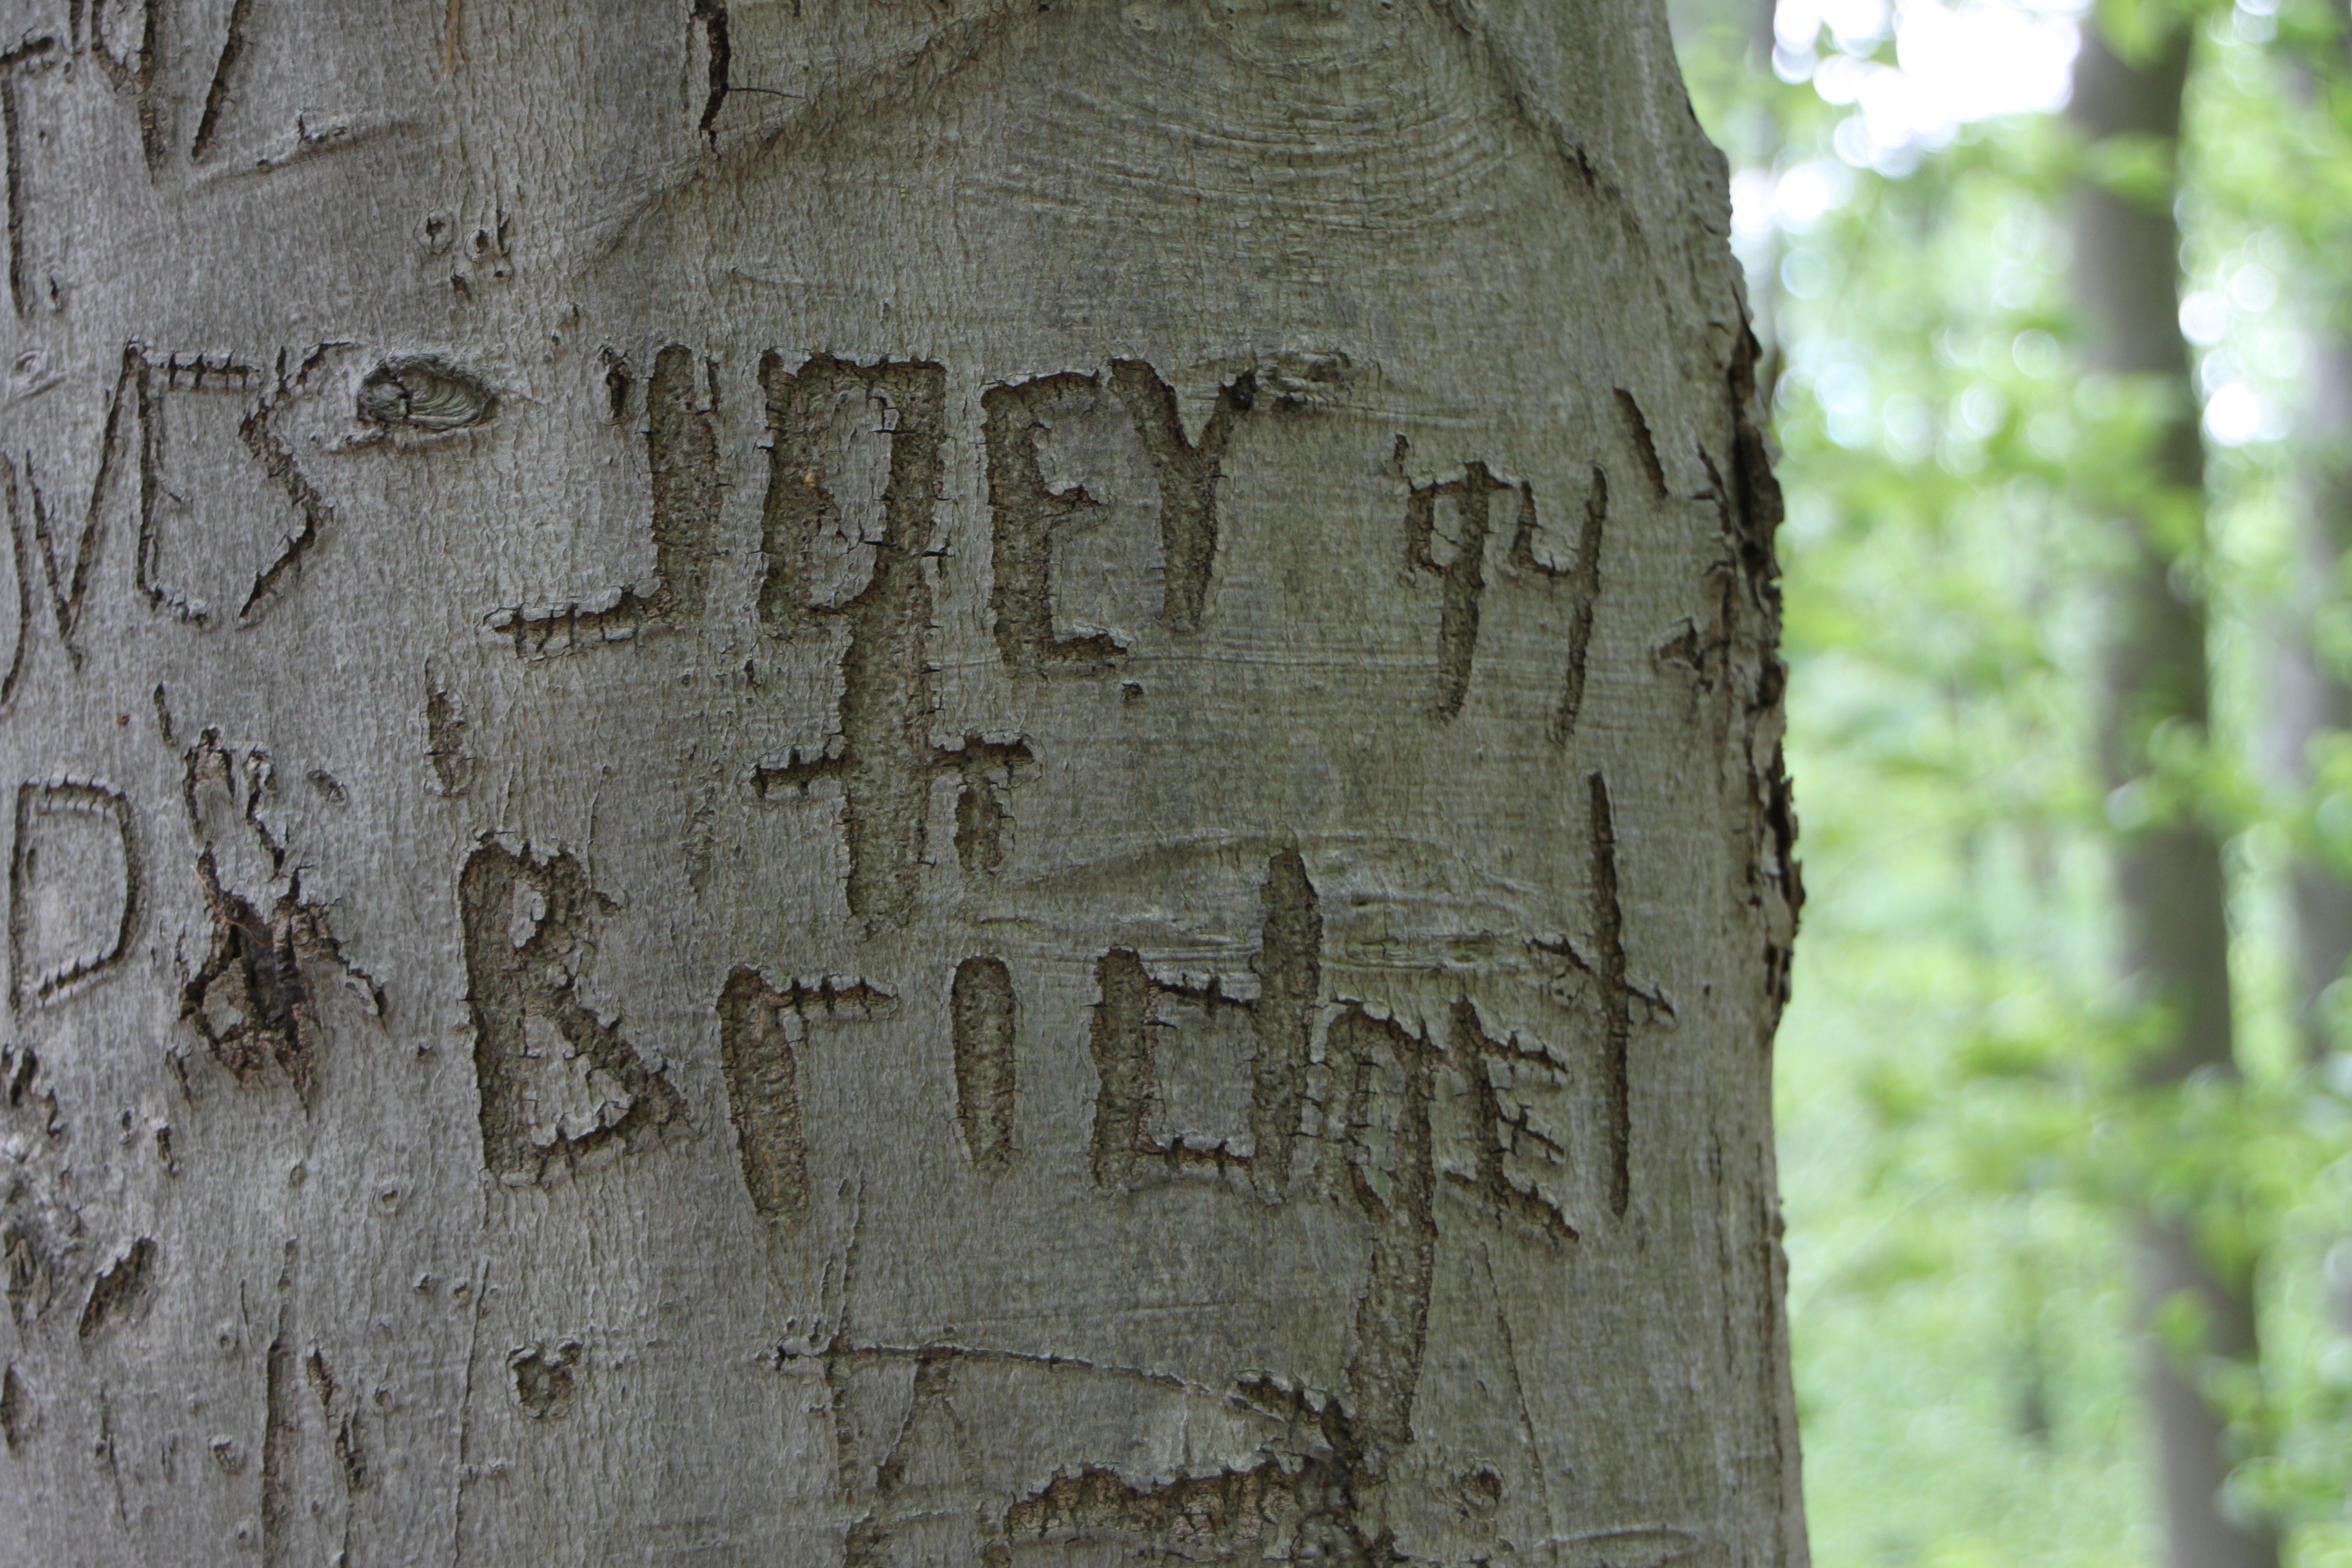 How I got my husband to carve my name in a tree